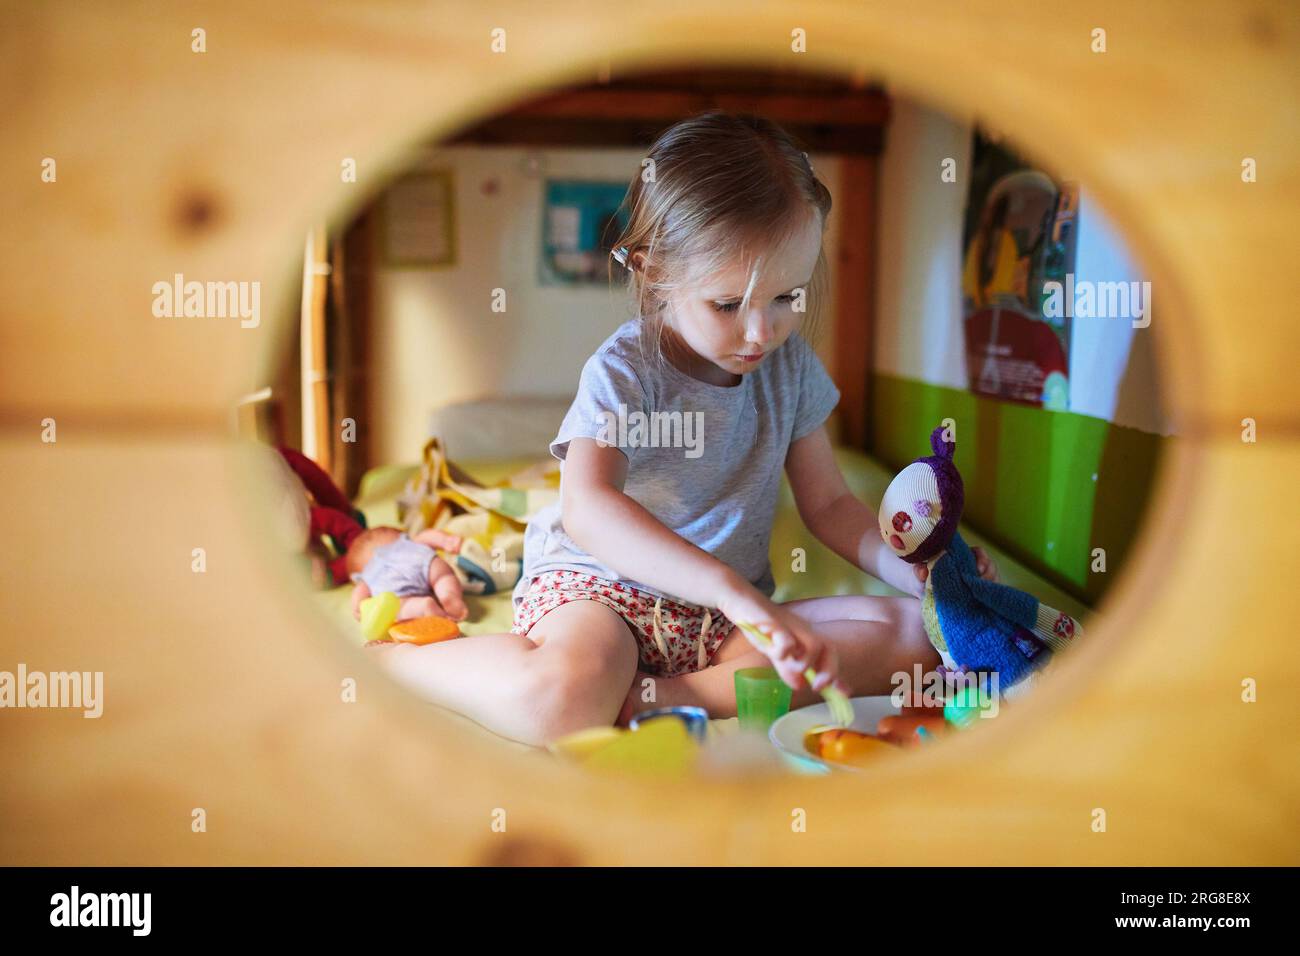 Adorable preschooler girl playing with dolls and toys on bunk bed at home. Indoors activities for kids Stock Photo